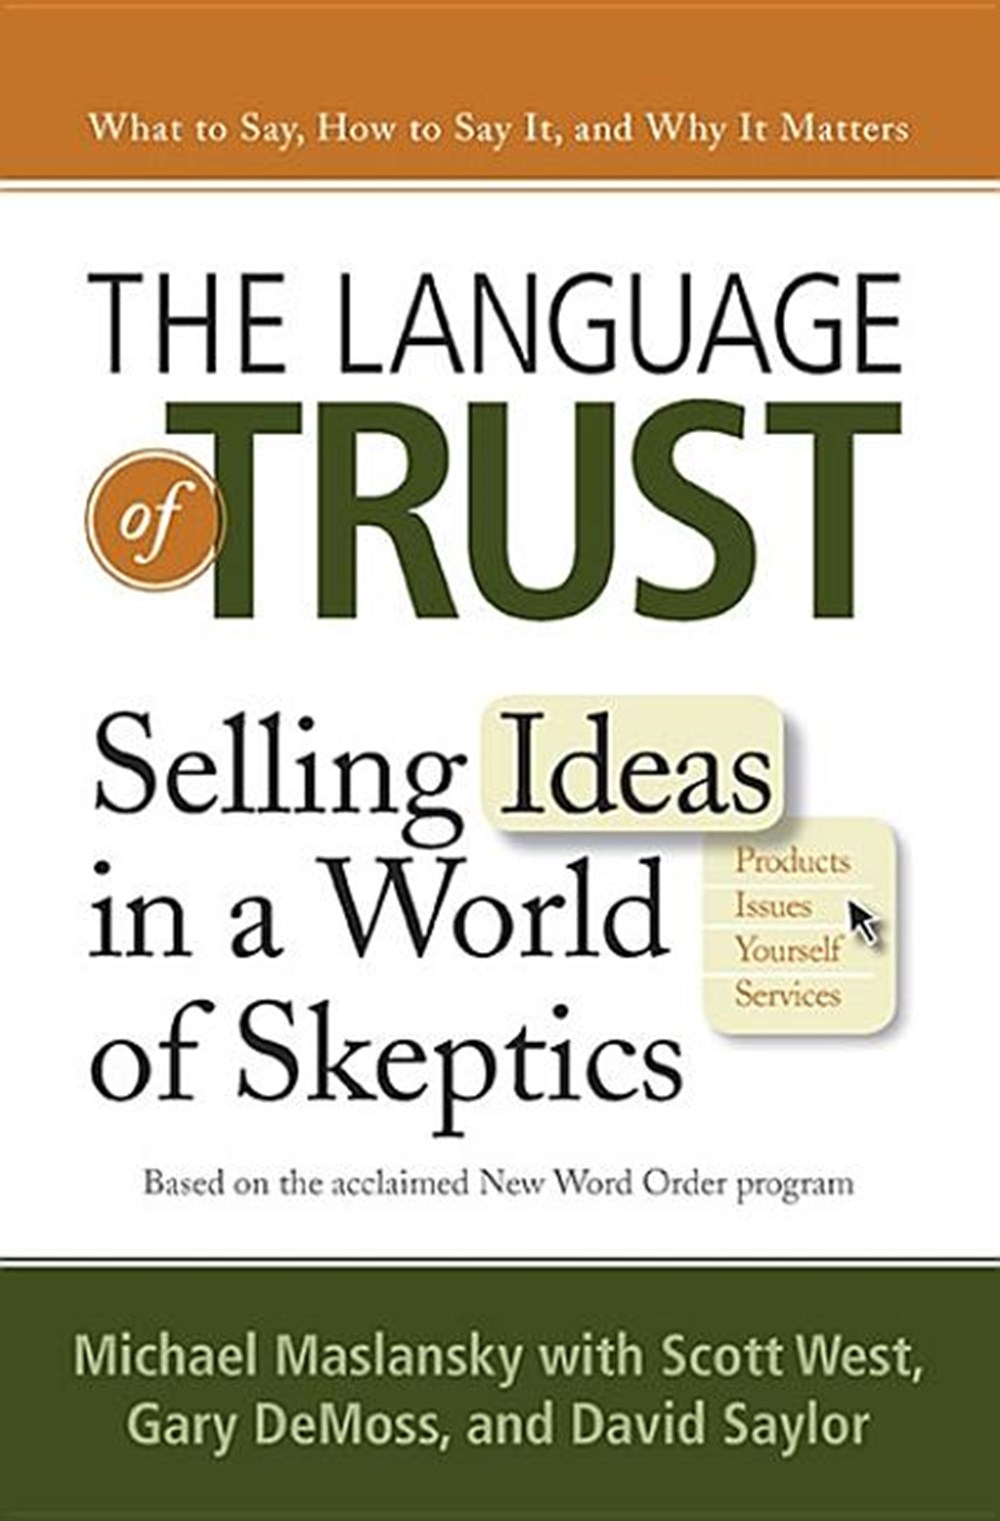 Language of Trust: Selling Ideas in a World of Skeptics